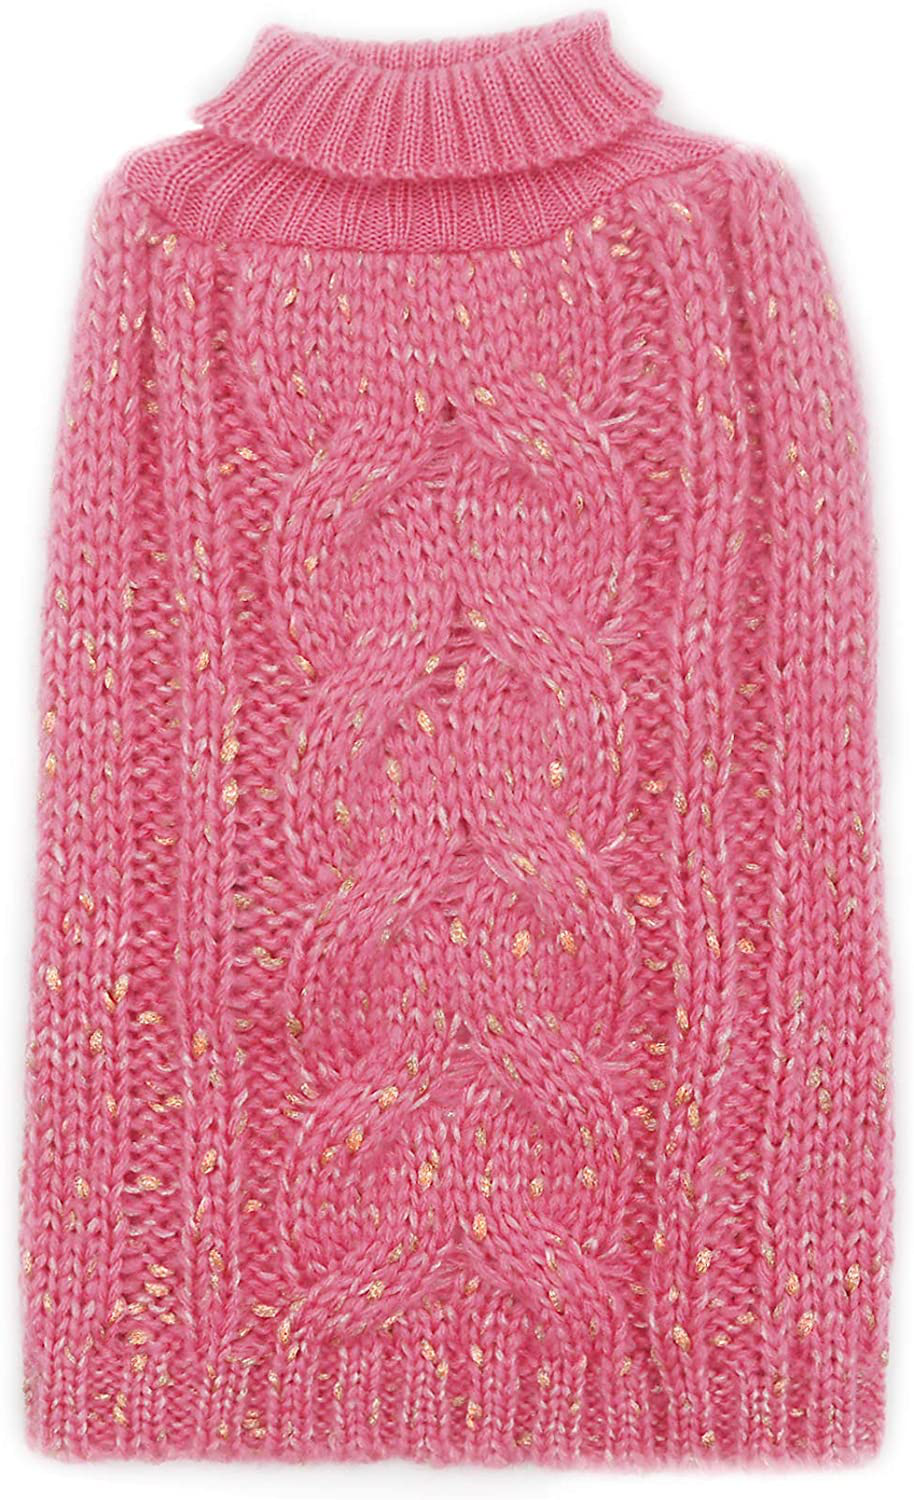 KYEESE Dog Sweaters Turtleneck Dog Pullover Sweater Knitwear with Golden Yarn Warm Pet Sweater for Fall Winter Animals & Pet Supplies > Pet Supplies > Dog Supplies > Dog Apparel KYEESE Pink Medium 